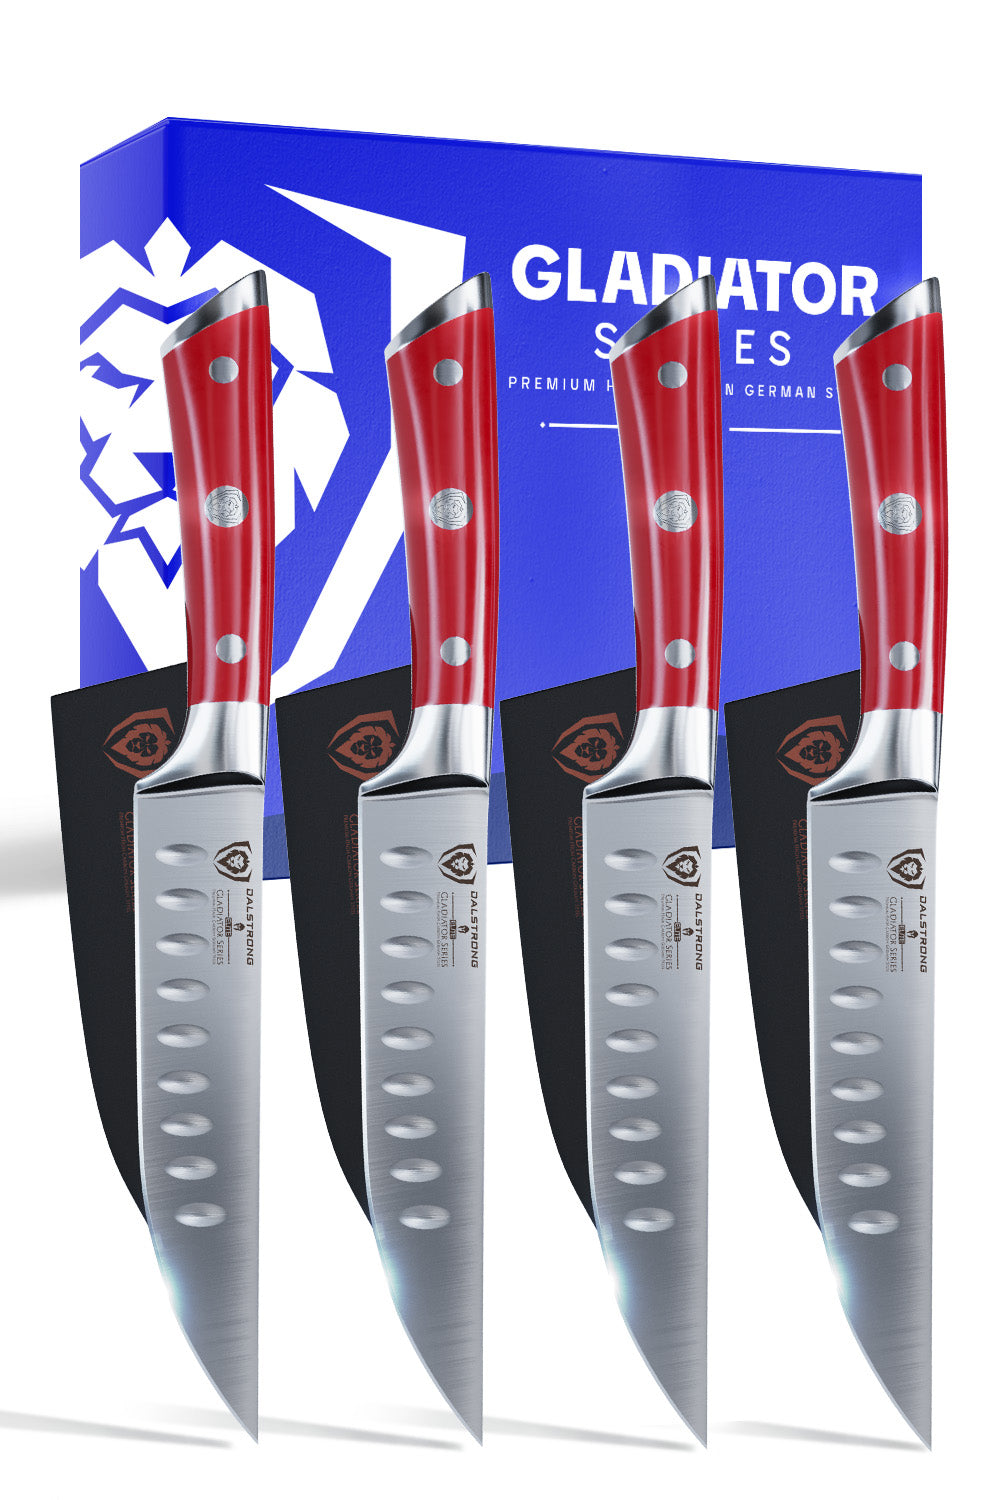 4-Piece Straight-Edge Steak Knife Set | Red ABS Handles | Gladiator Series | NSF Certified | Dalstrong ©